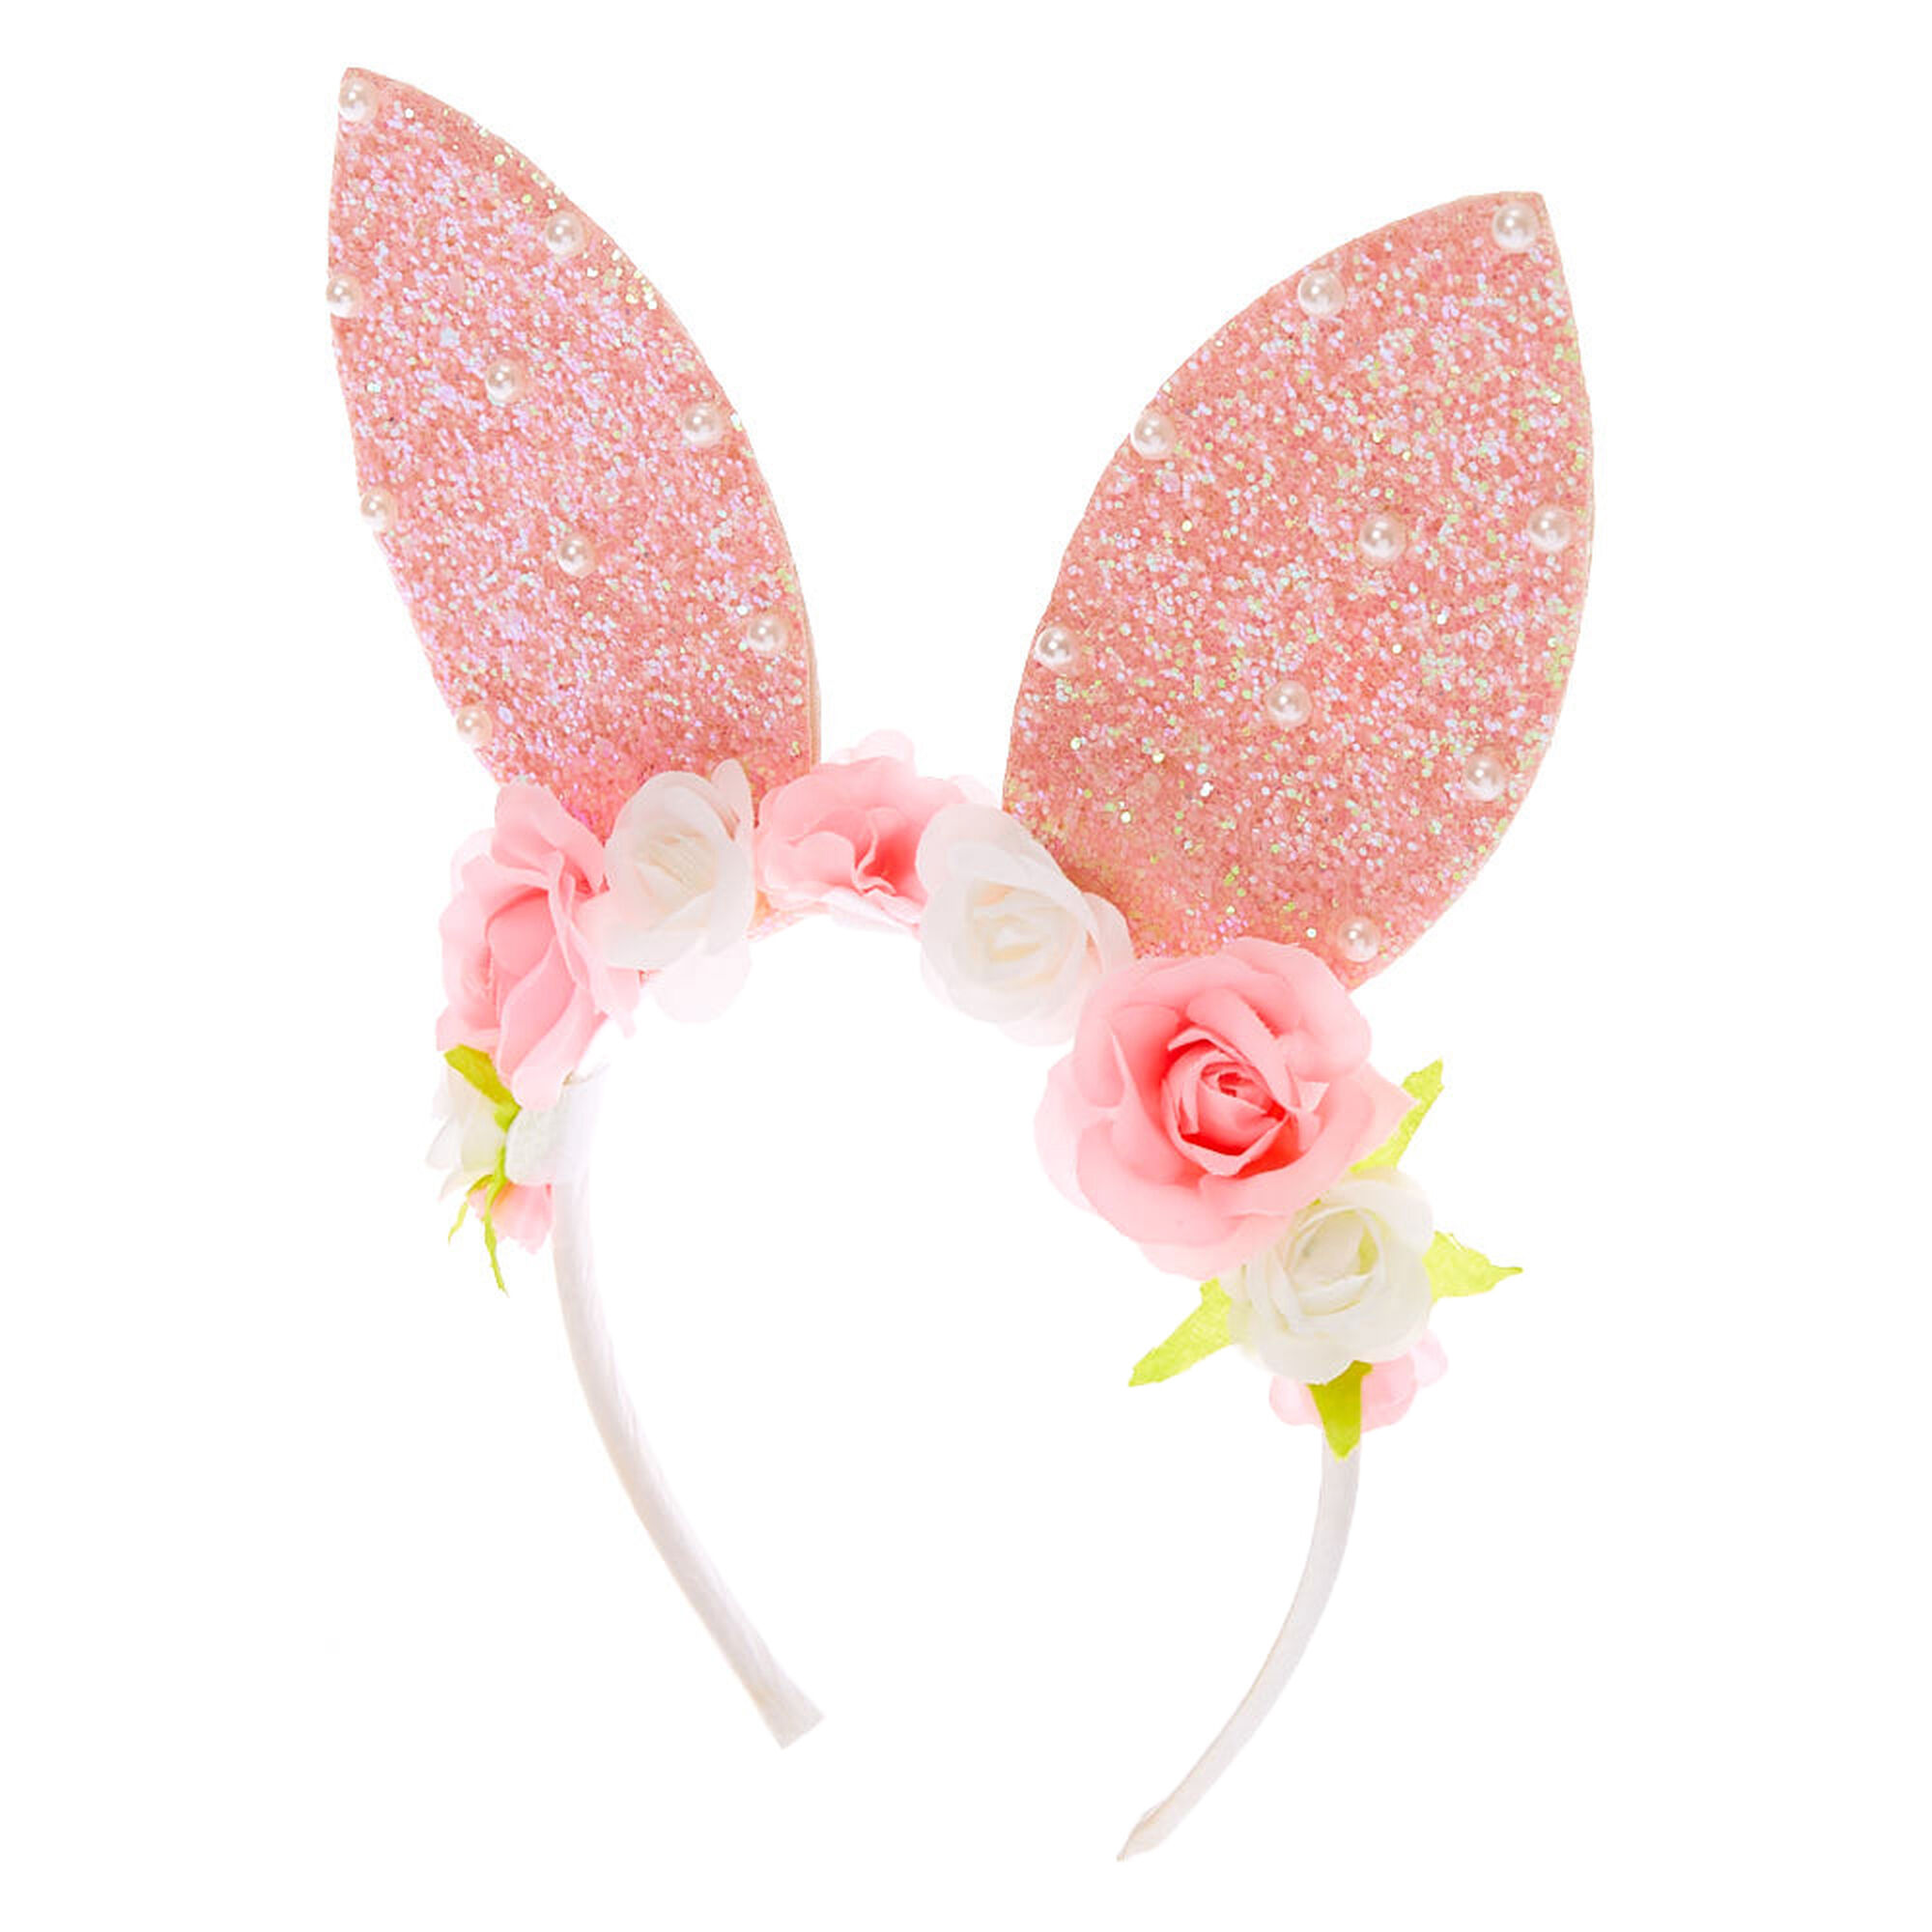 Floral Pearl Bunny Ear Headband | Easter Gifts for Kids | Beanstalk Mums